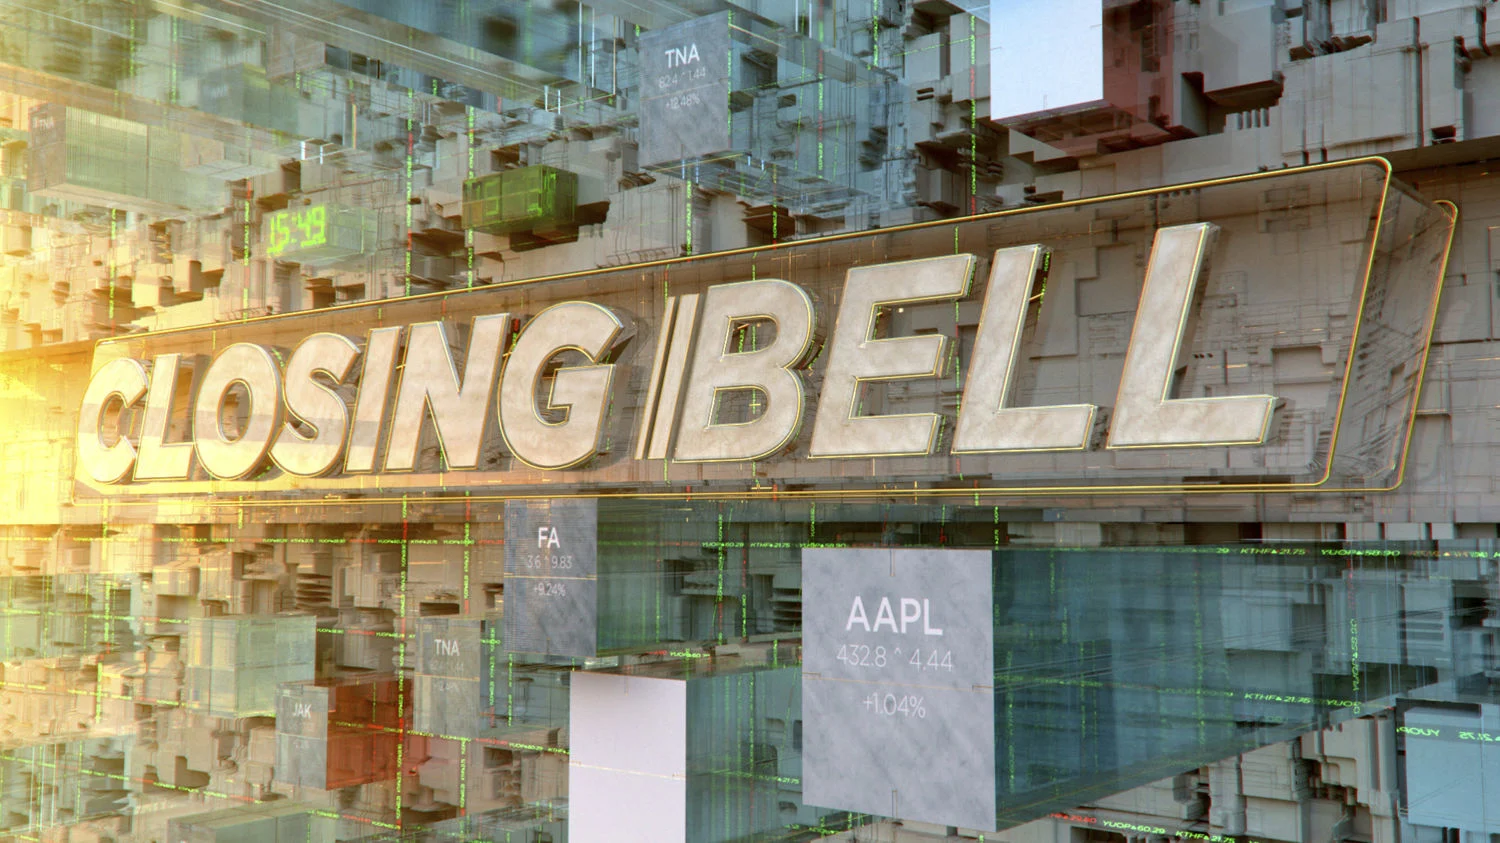 Working alongside CNBC, BigStar was given the chance to re-brand “Closing Bell”, the iconic, long-running show which covers daily stock market movements and other important, market-centric news in a sleek new show package.